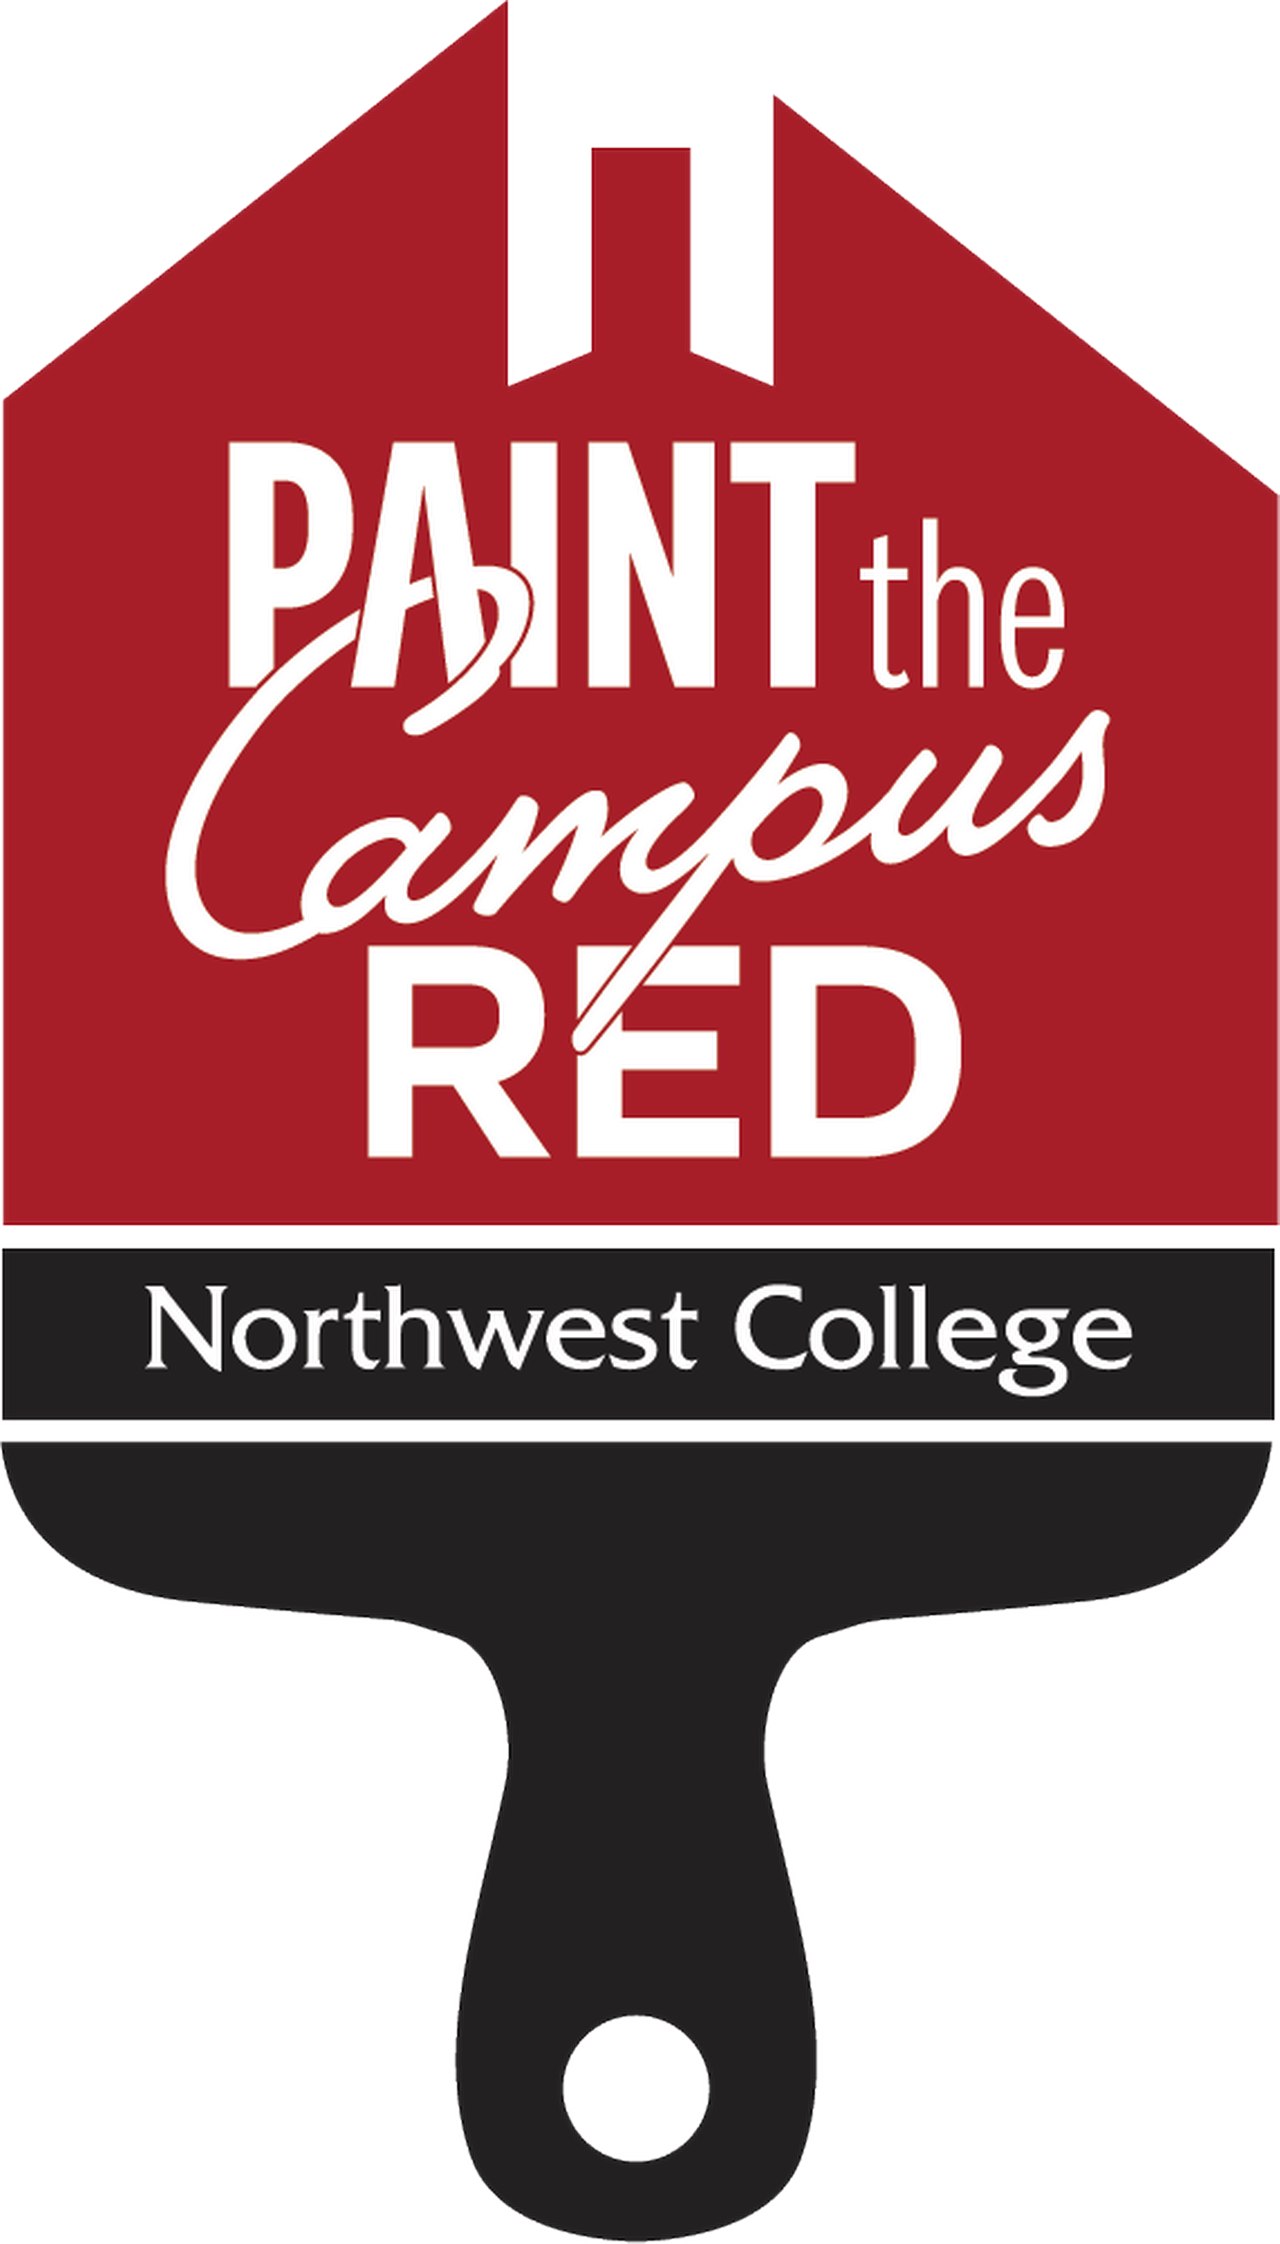 Paint the Campus Red image